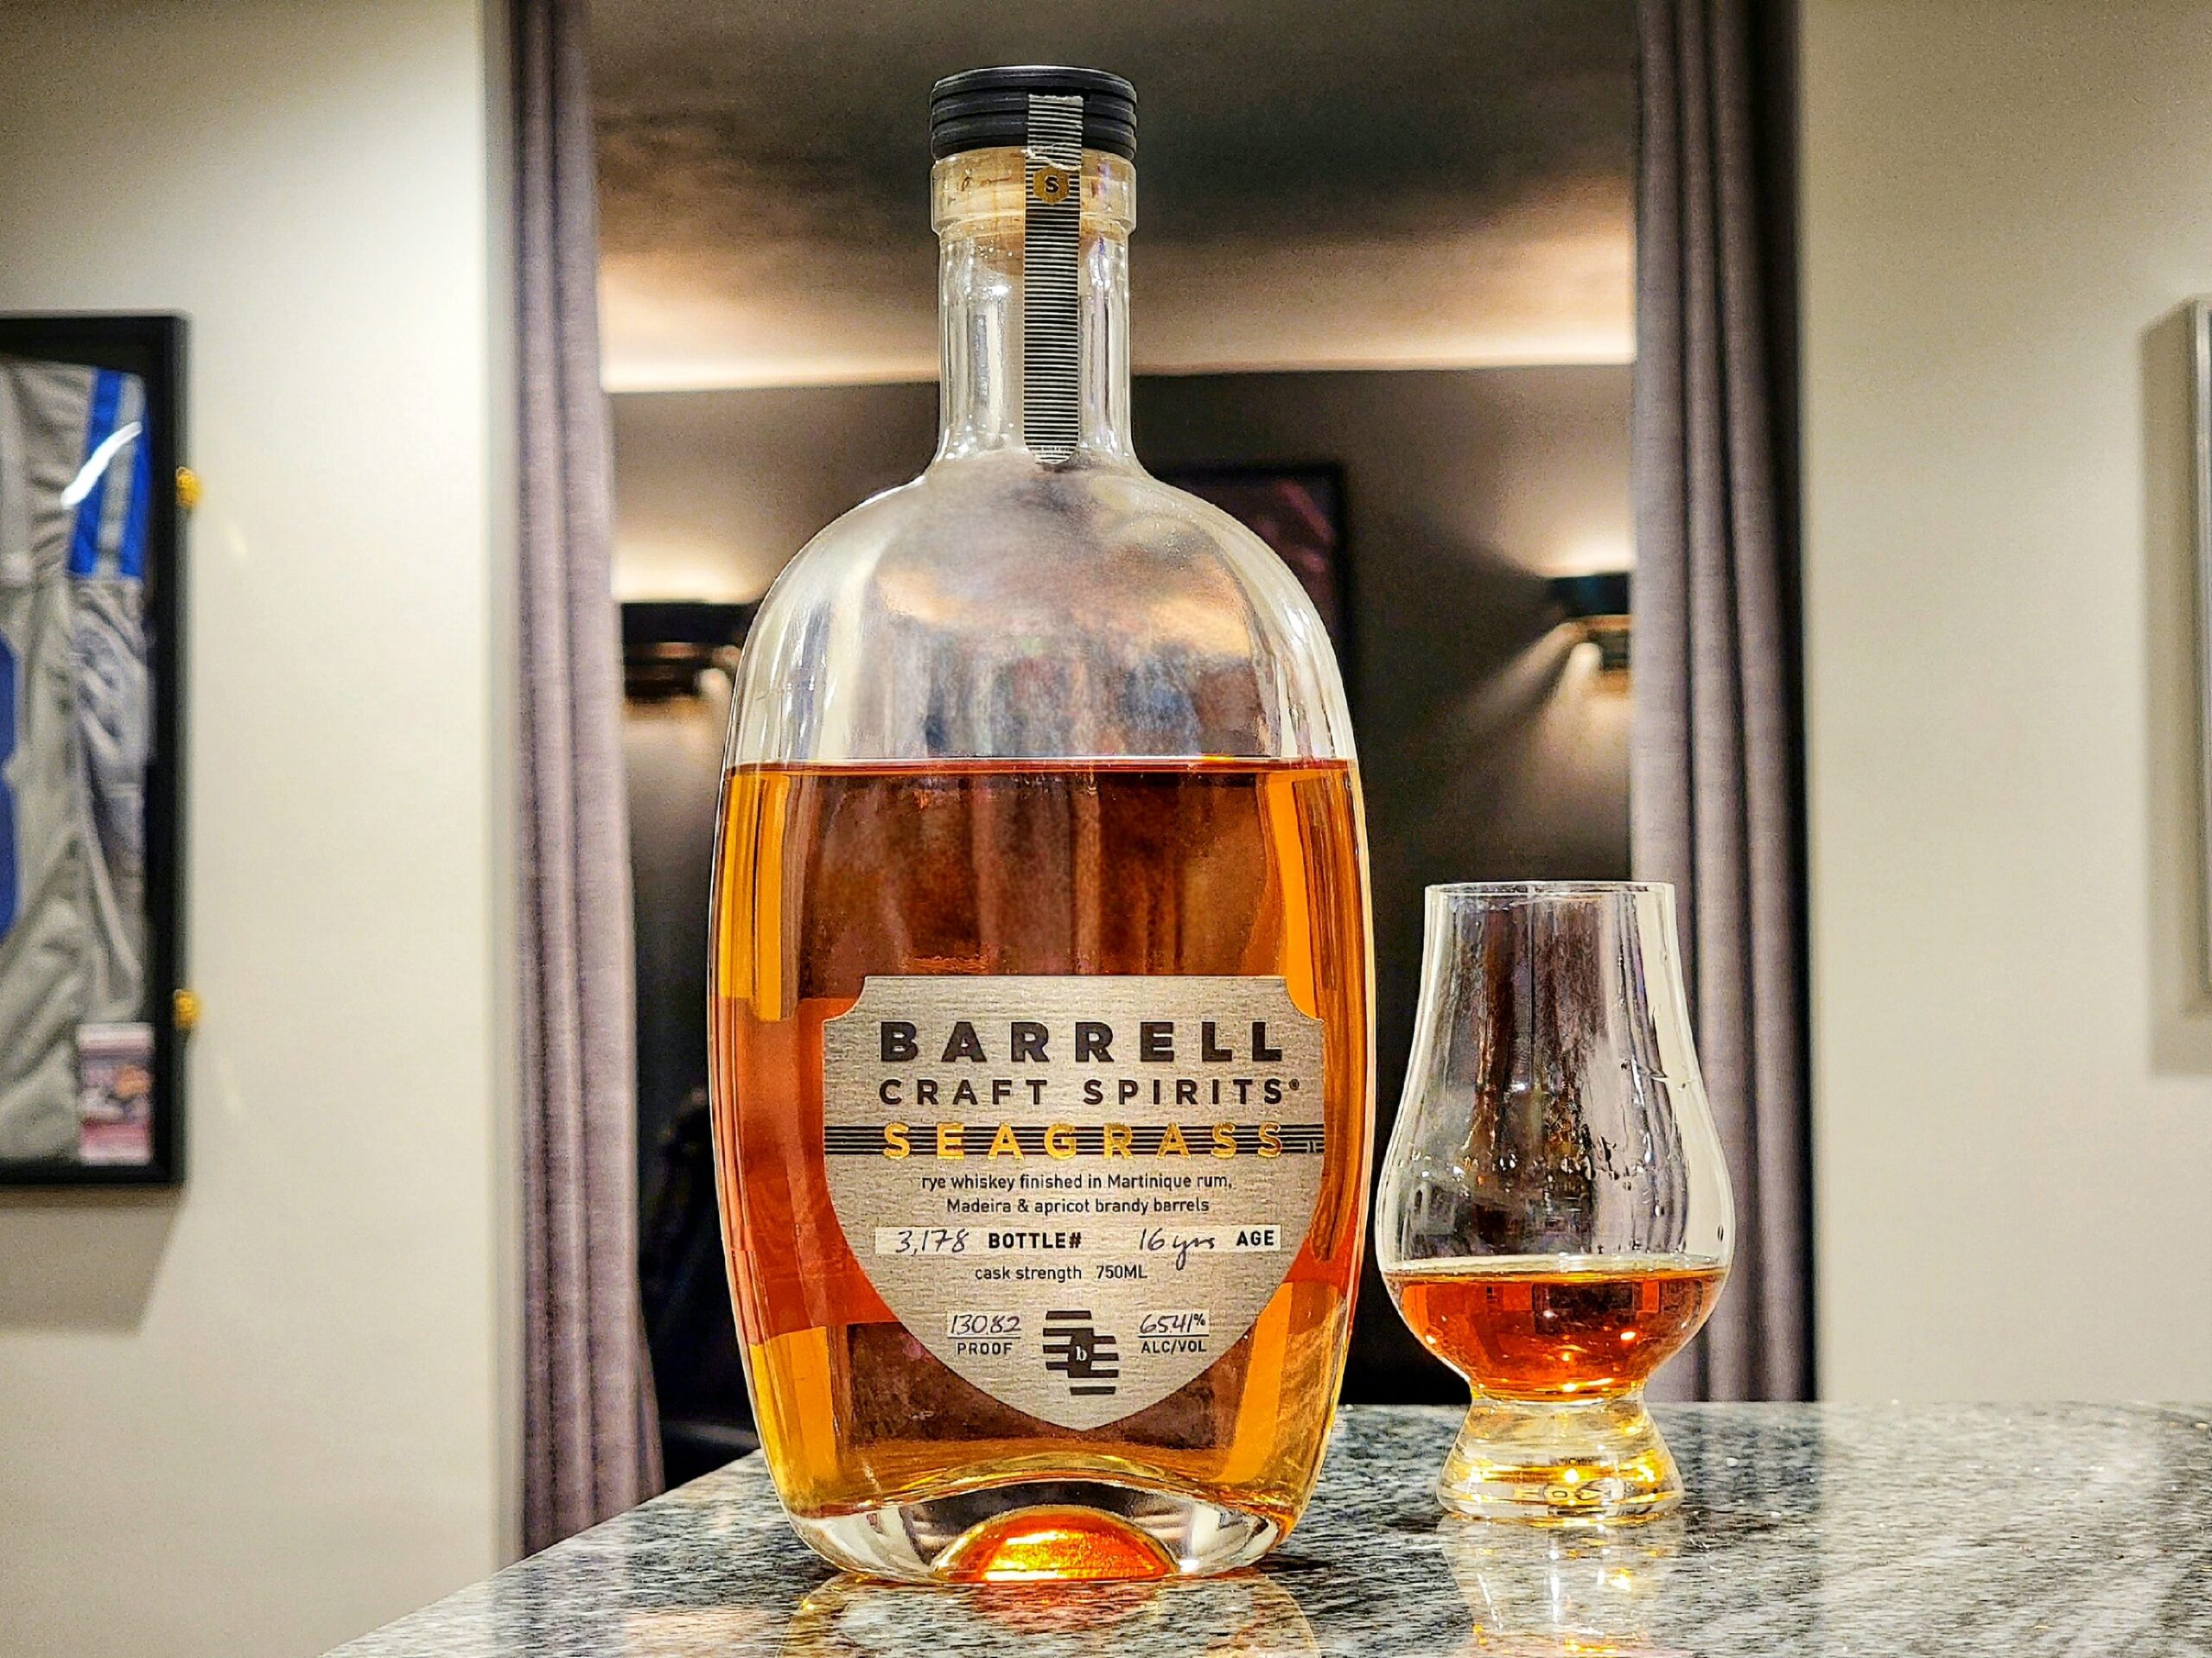 Barrell Craft Spirits Gray Label 16 Year Old Seagrass Rye Whiskey